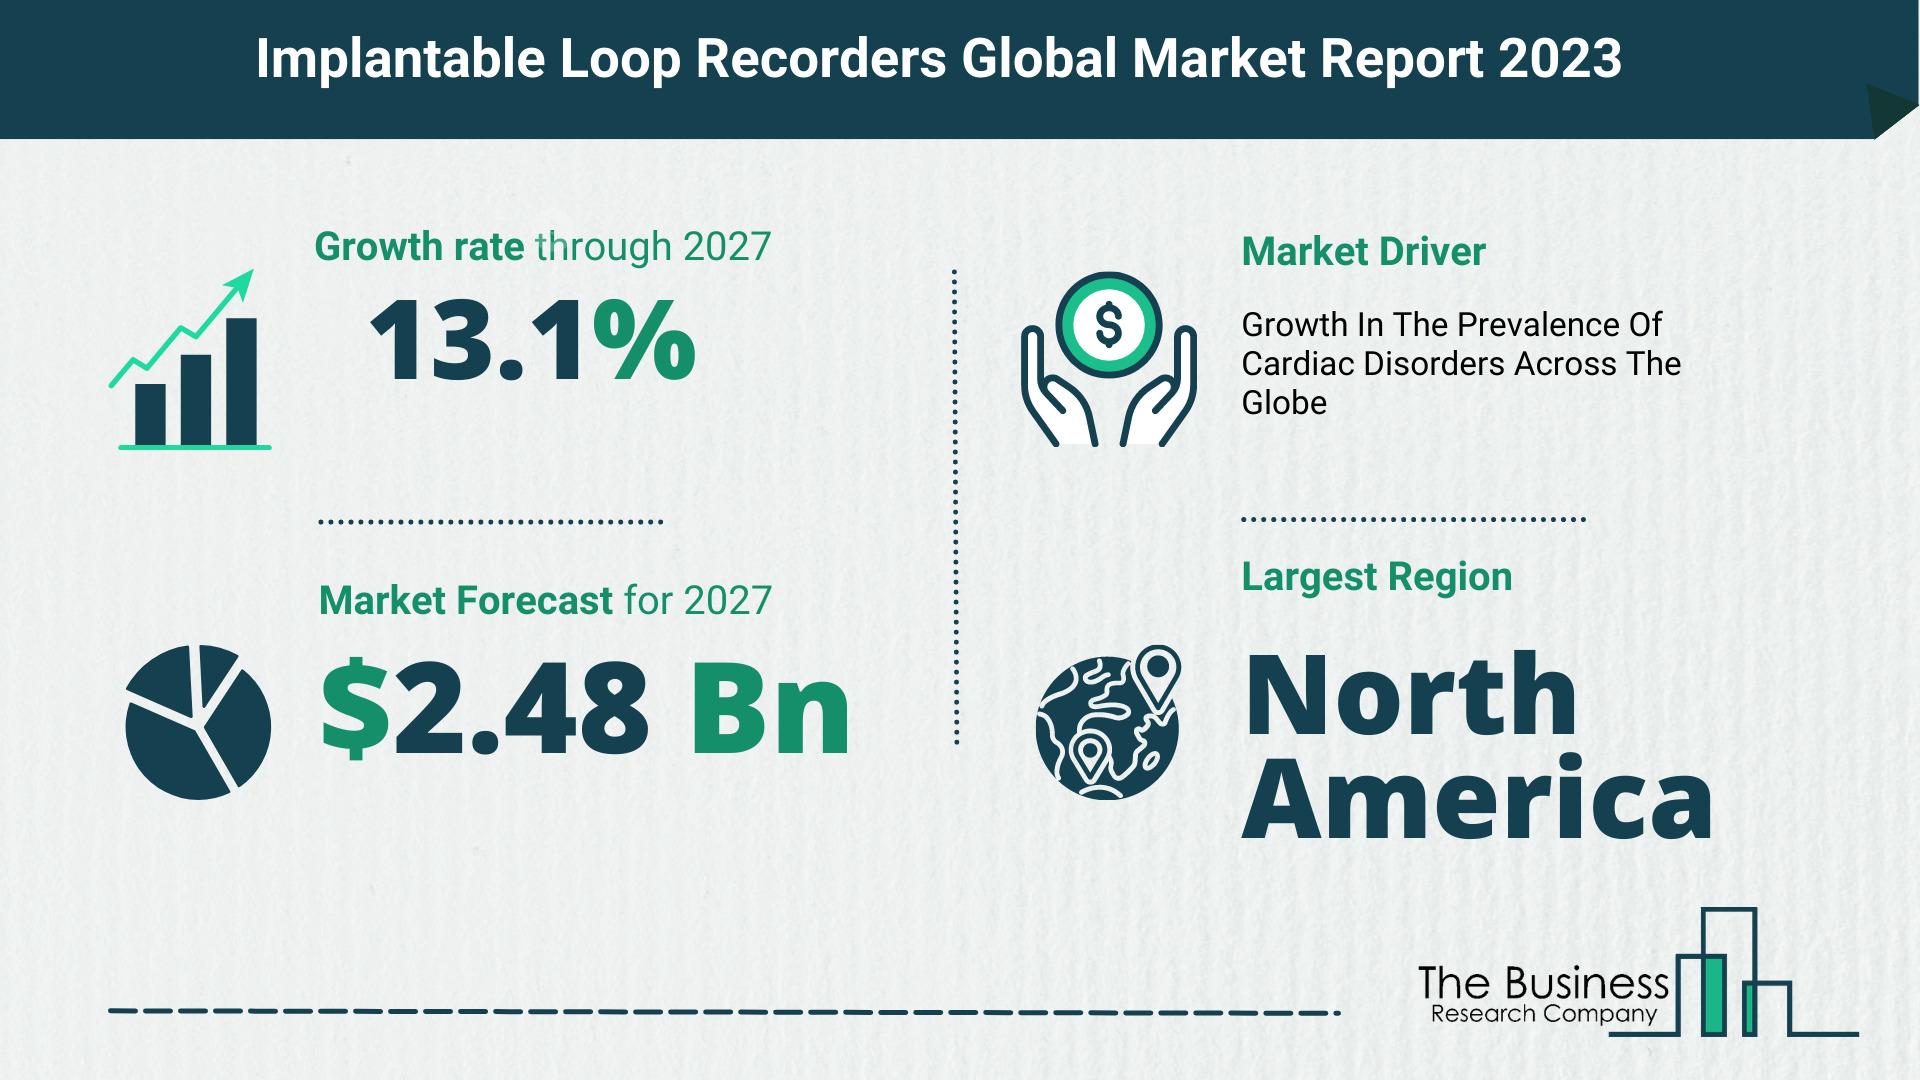 What Will The Implantable Loop Recorders Market Look Like In 2023?